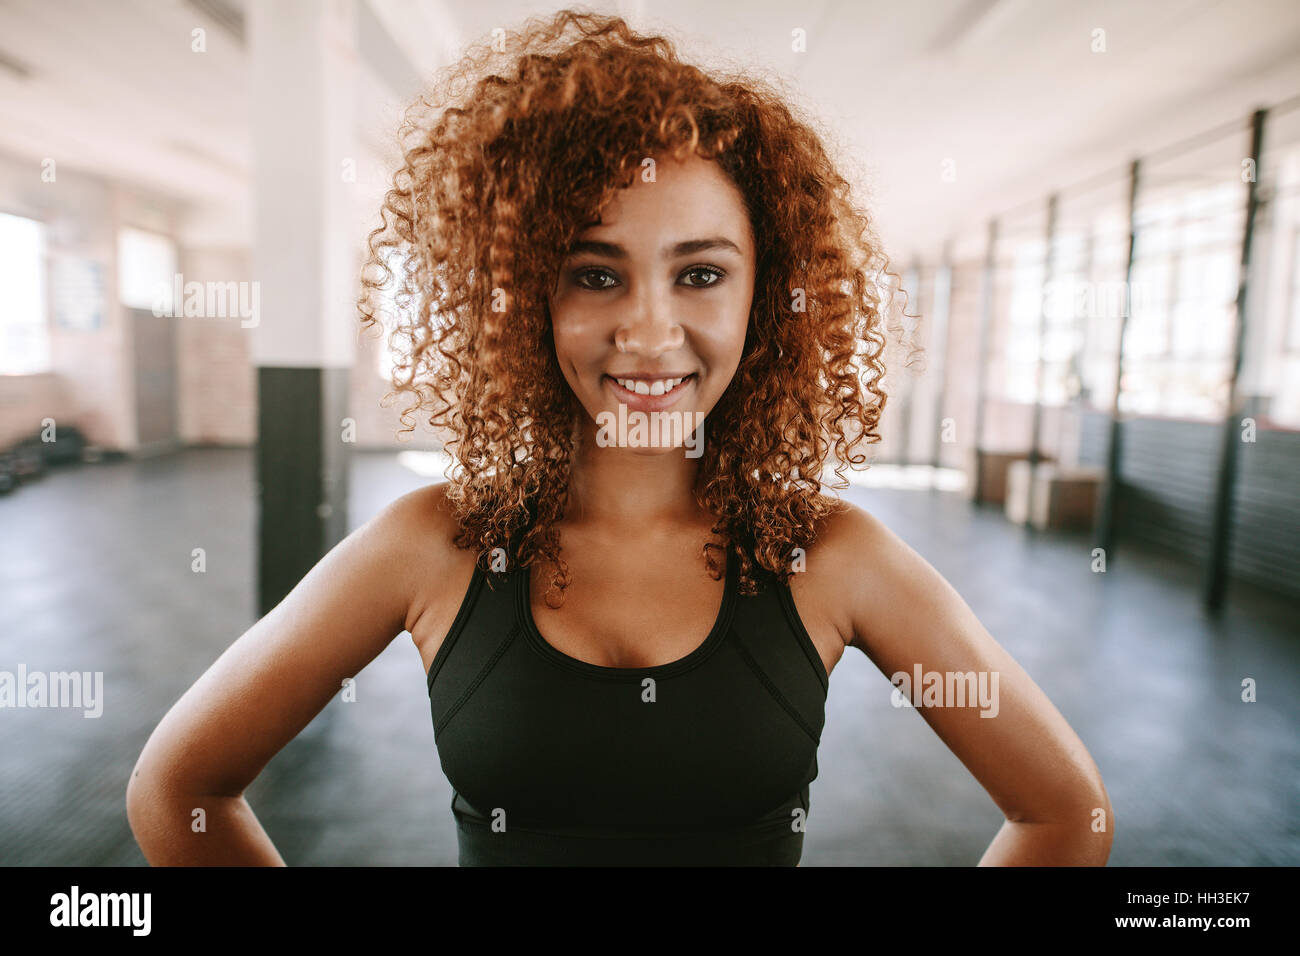 Portrait of young african female with curly hair smiling in health club. Happy and beautiful fitness woman at gym. Stock Photo